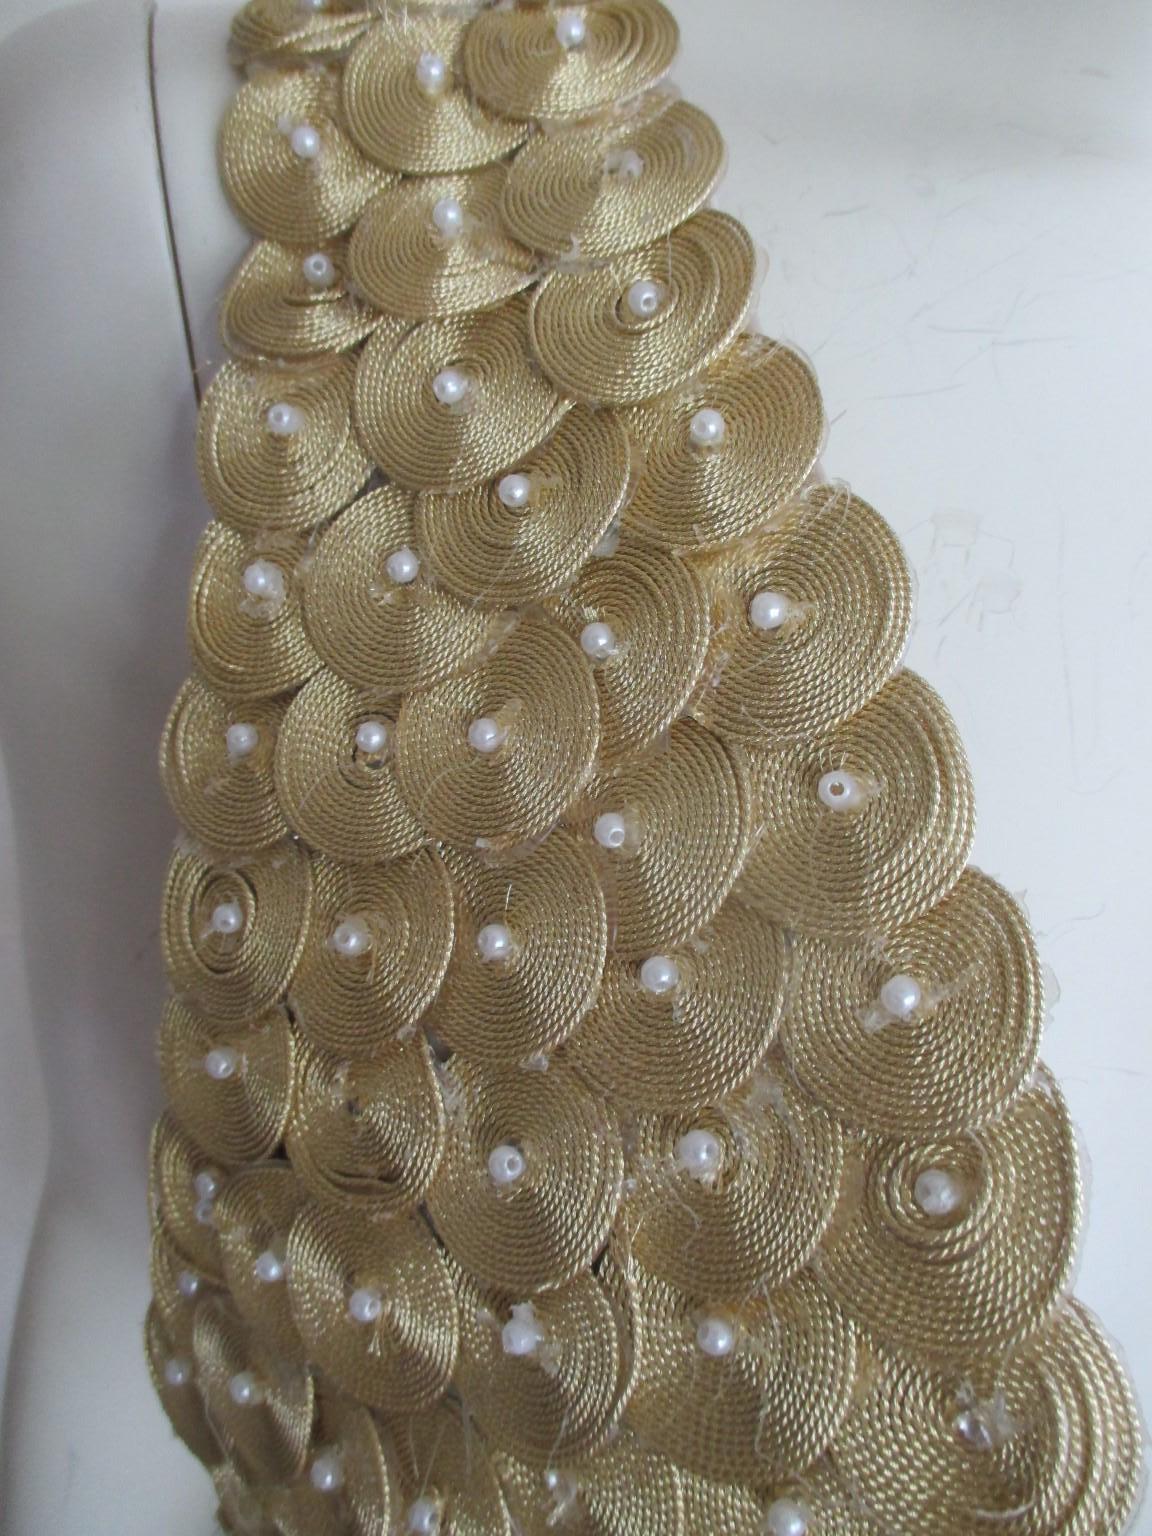 Traditional oriental handmade vintage bustier/gilet

We offer more exclusive vintage items, view our frontstore

Details:
Gold fabric decorated with faux pearls
no buttons, no label
Fully lined
Pre owned condition with some wear of use, see